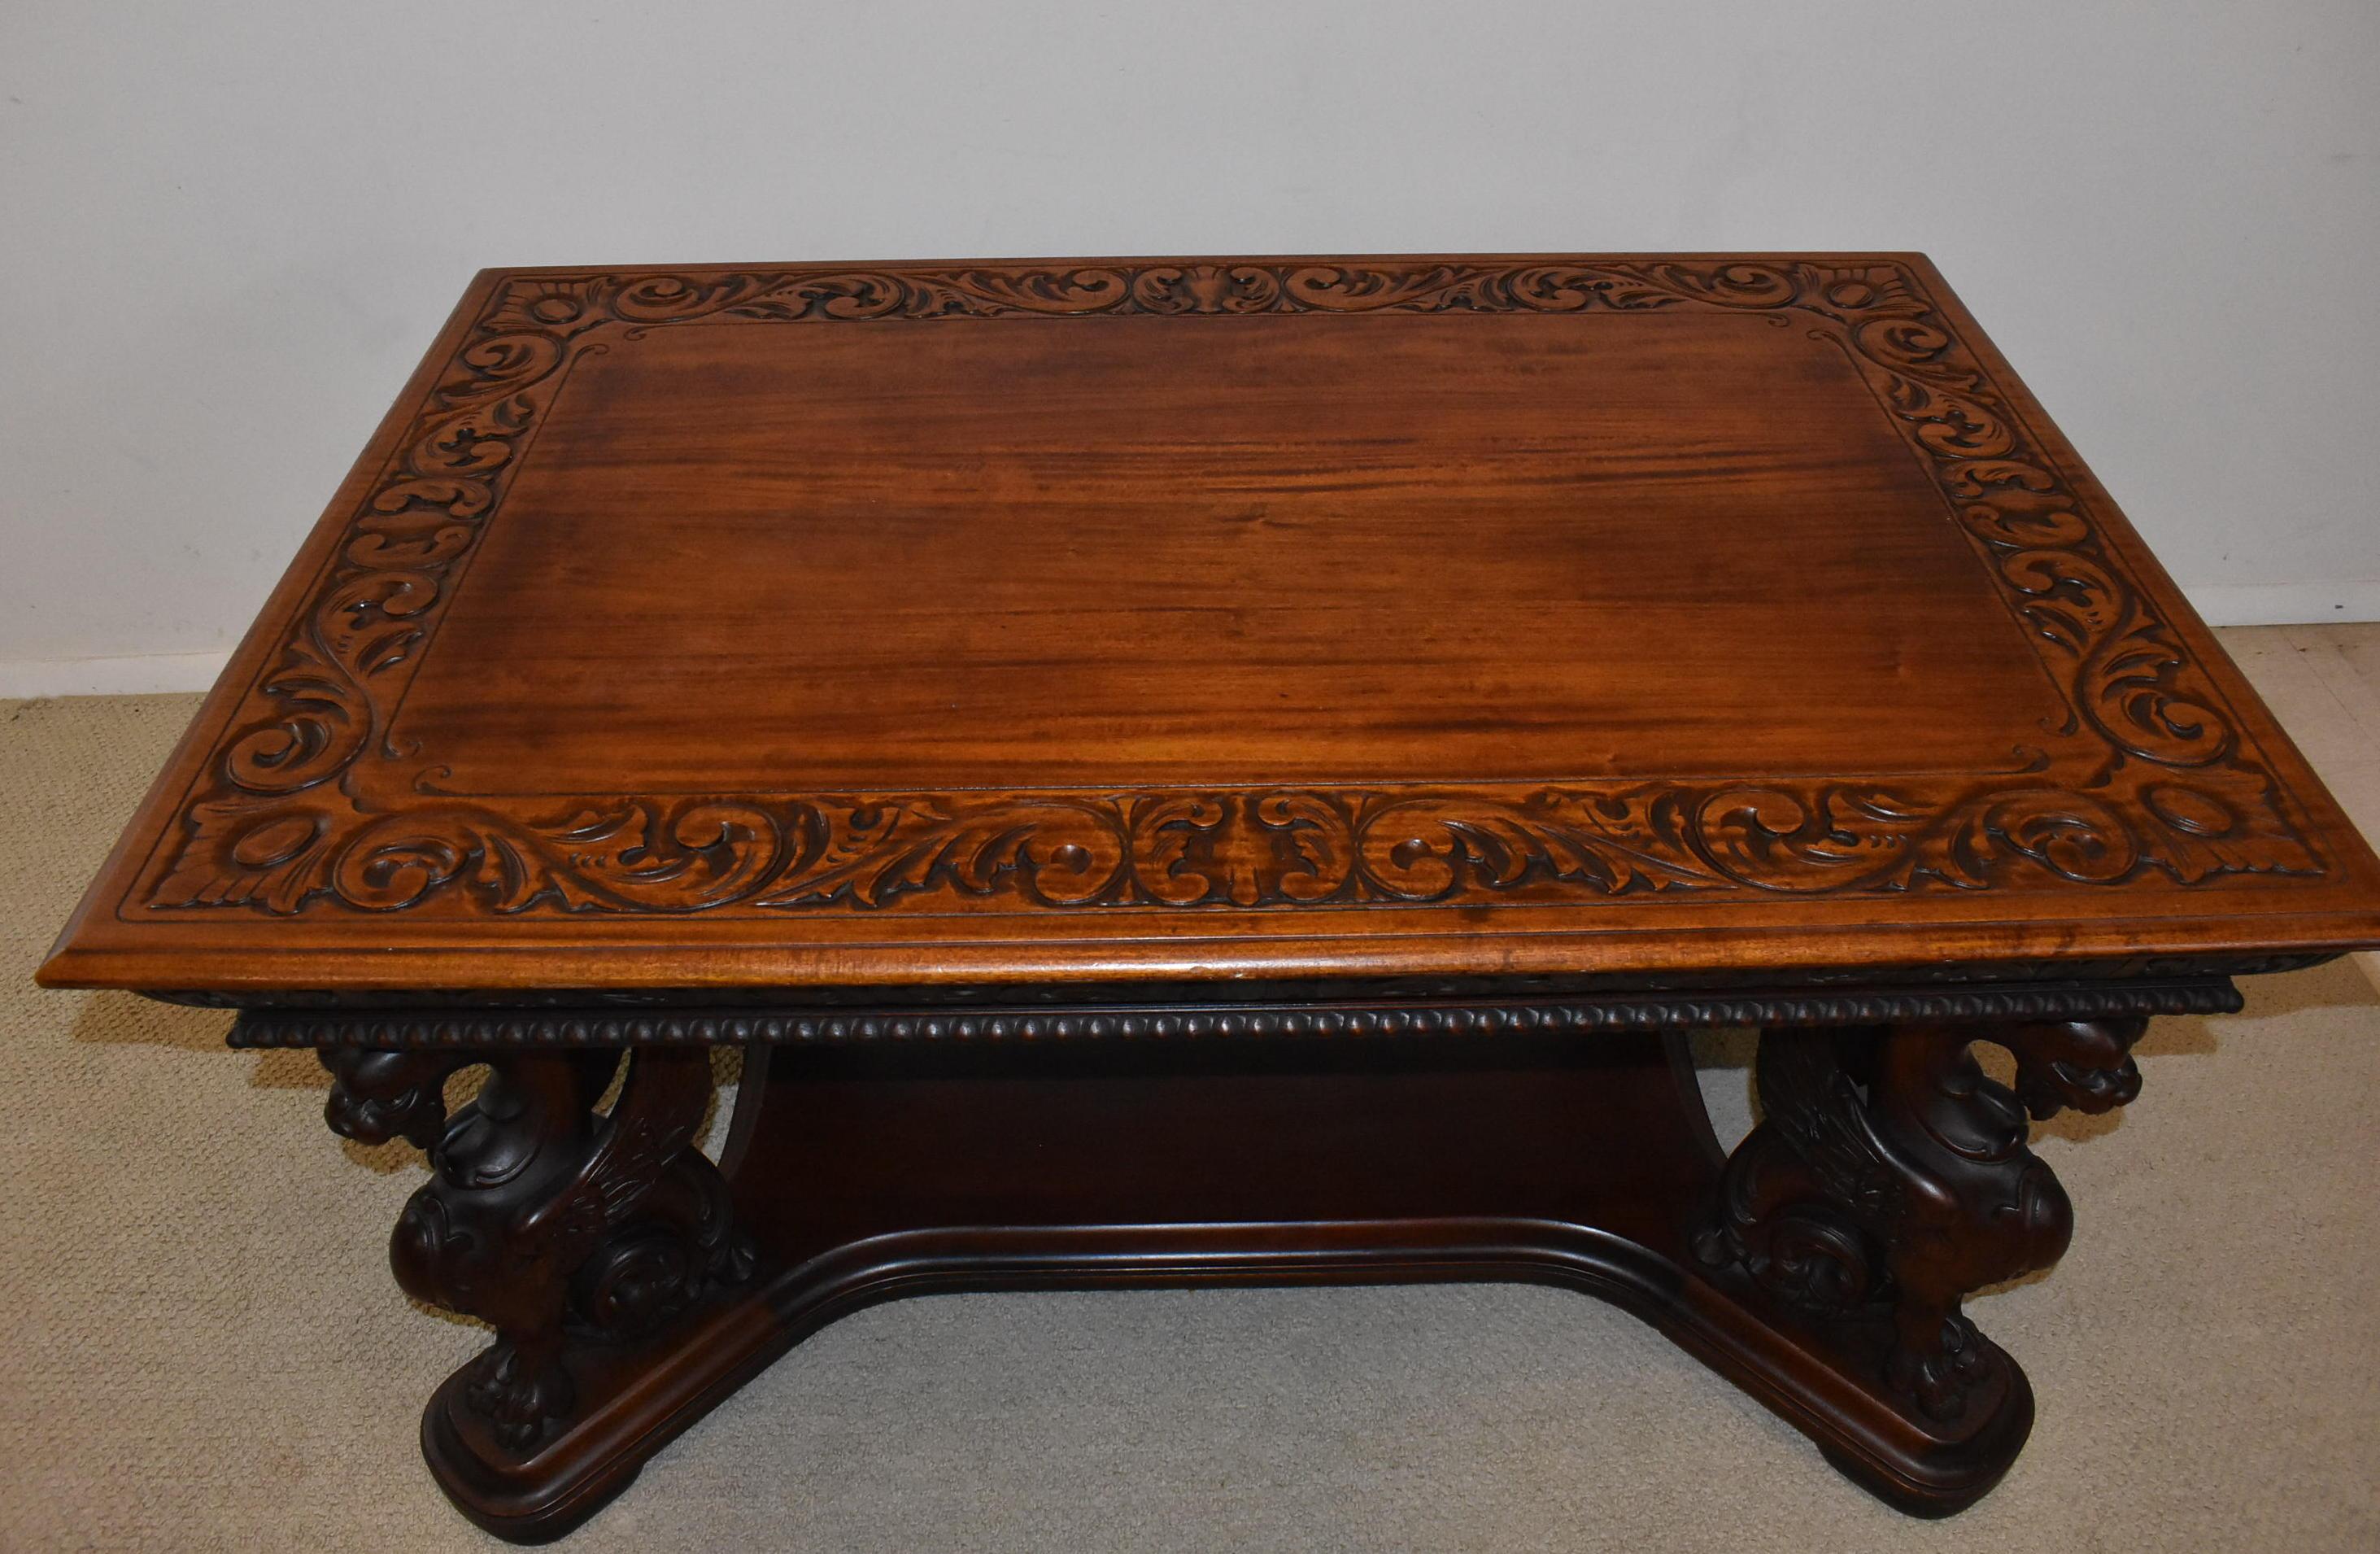 Full standing mahogany winged griffins partners desk by Horner. Two dove tailed drawers. Great condition with old finish. Carved desk top border.